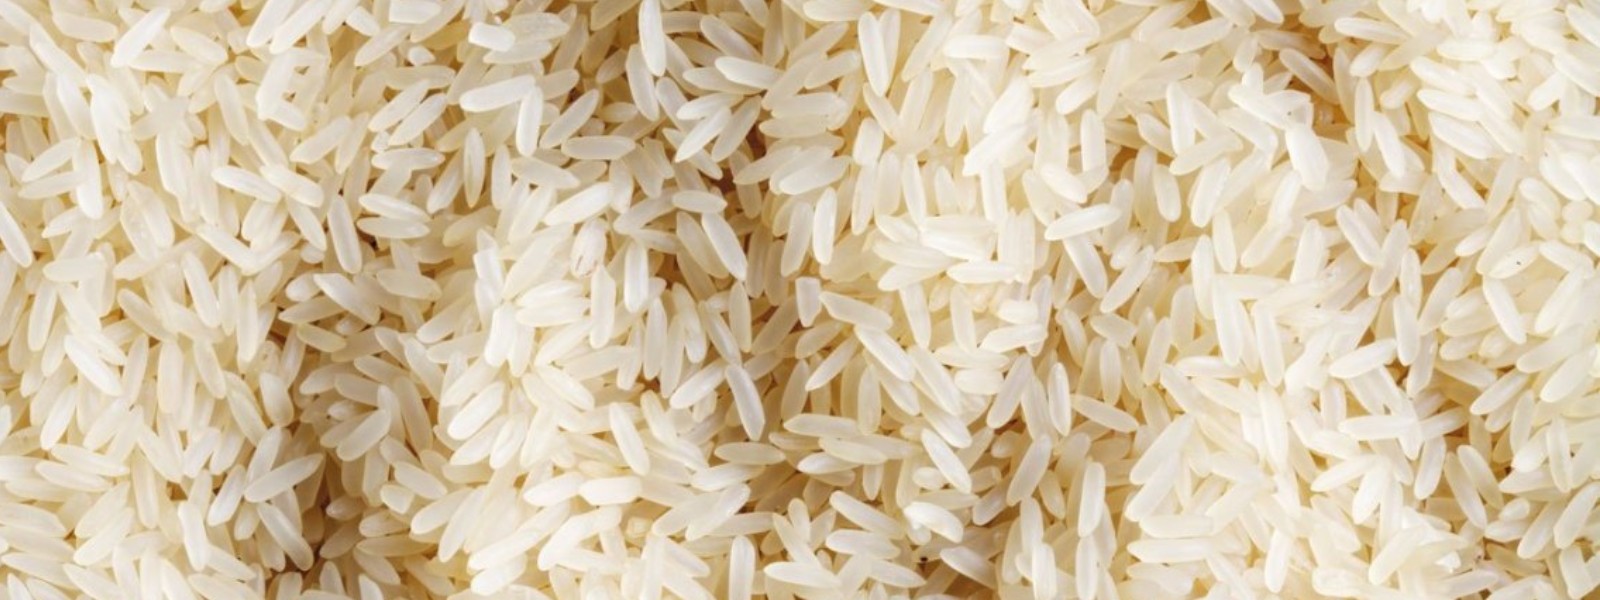 Imported rice safe: Health Ministry